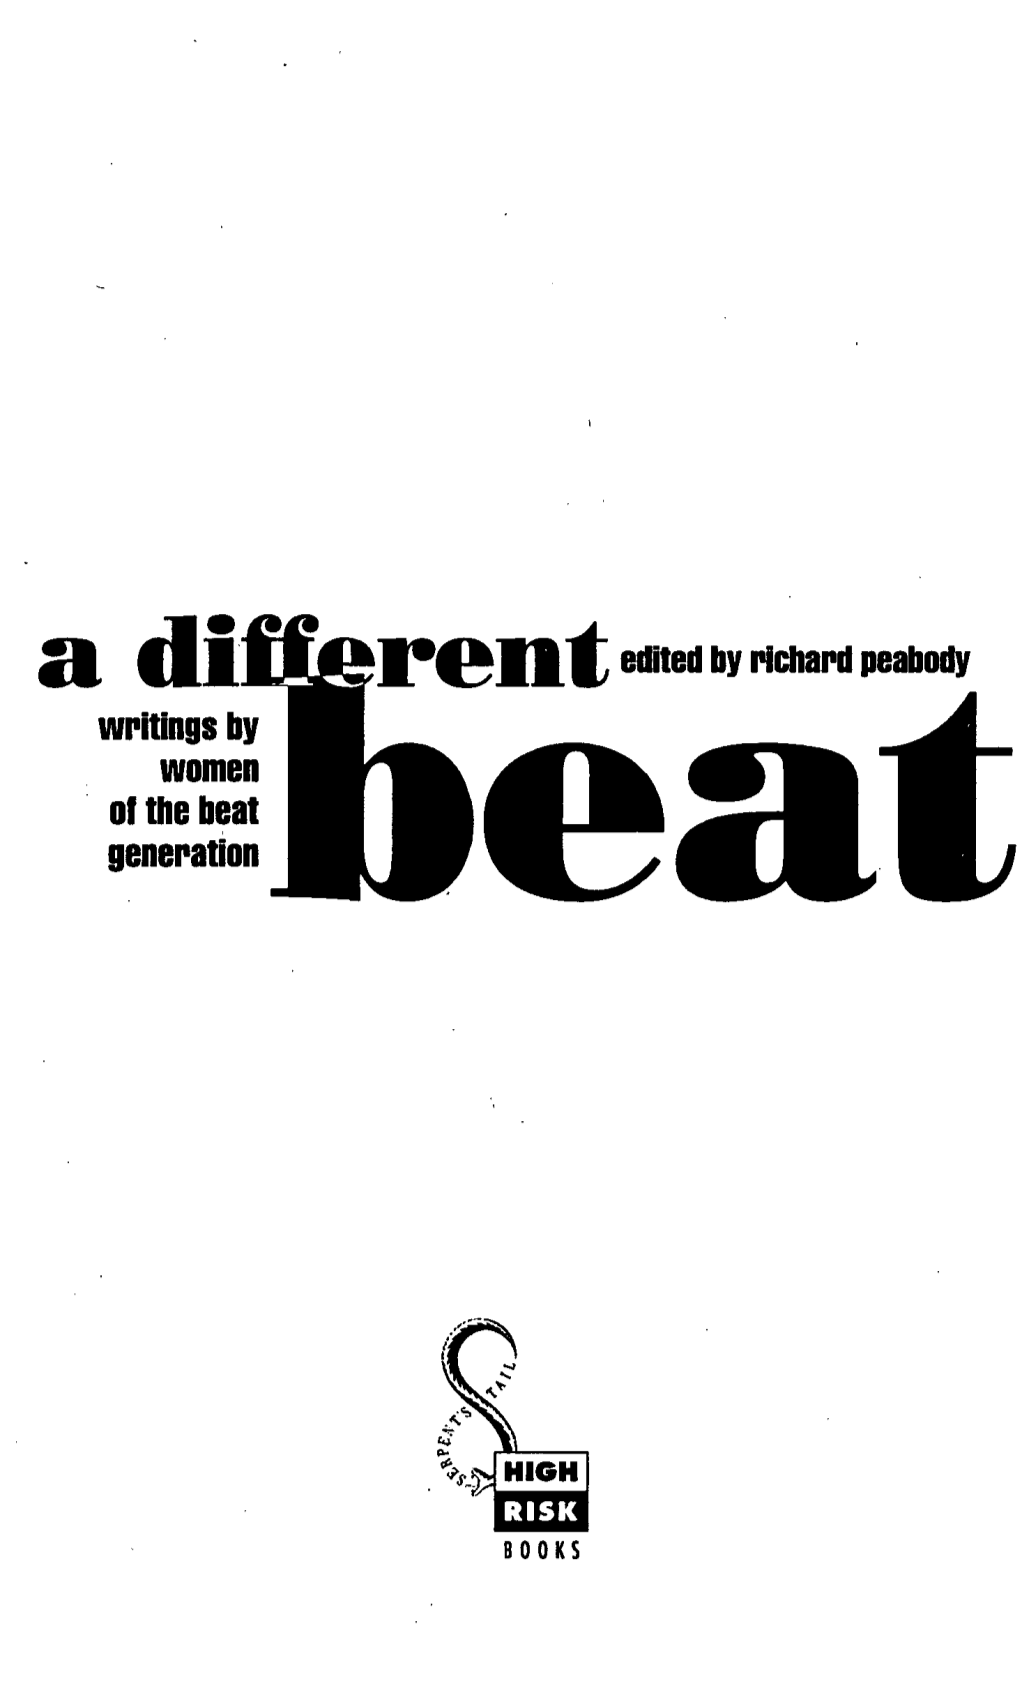 Writings by of the Beat Generation Edited by Richard Peabody